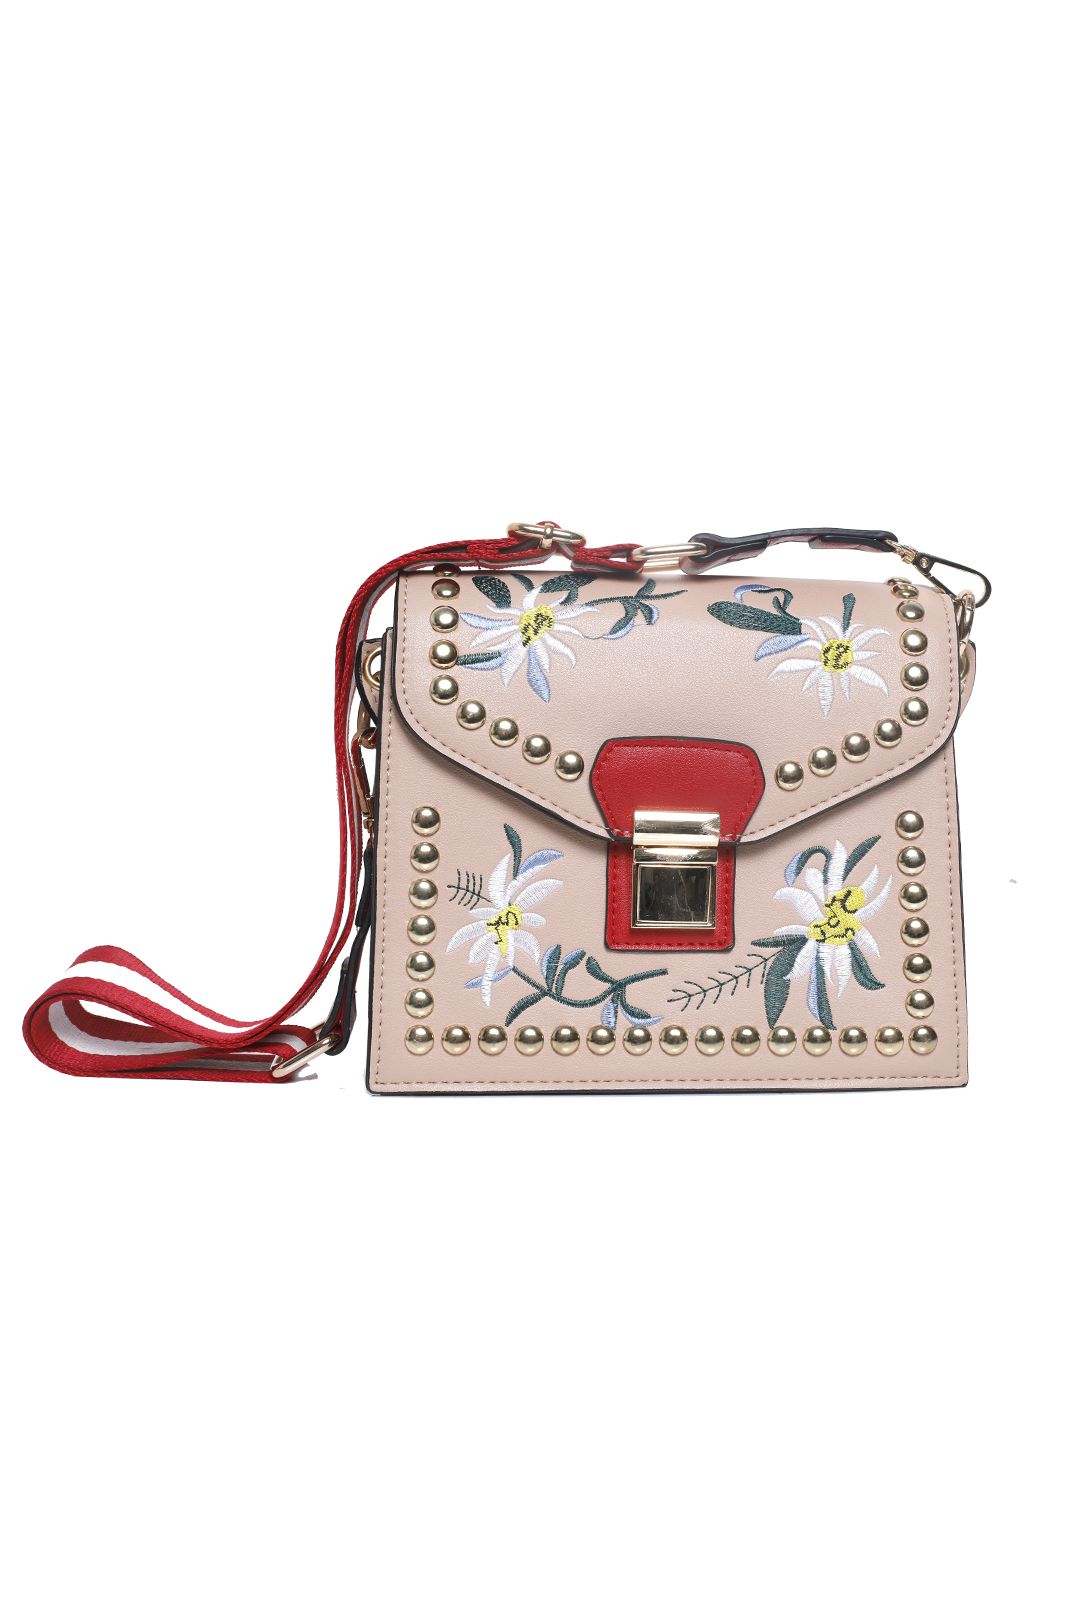 Adorne - Structured Floral Embroidery Bag - Nude - Front